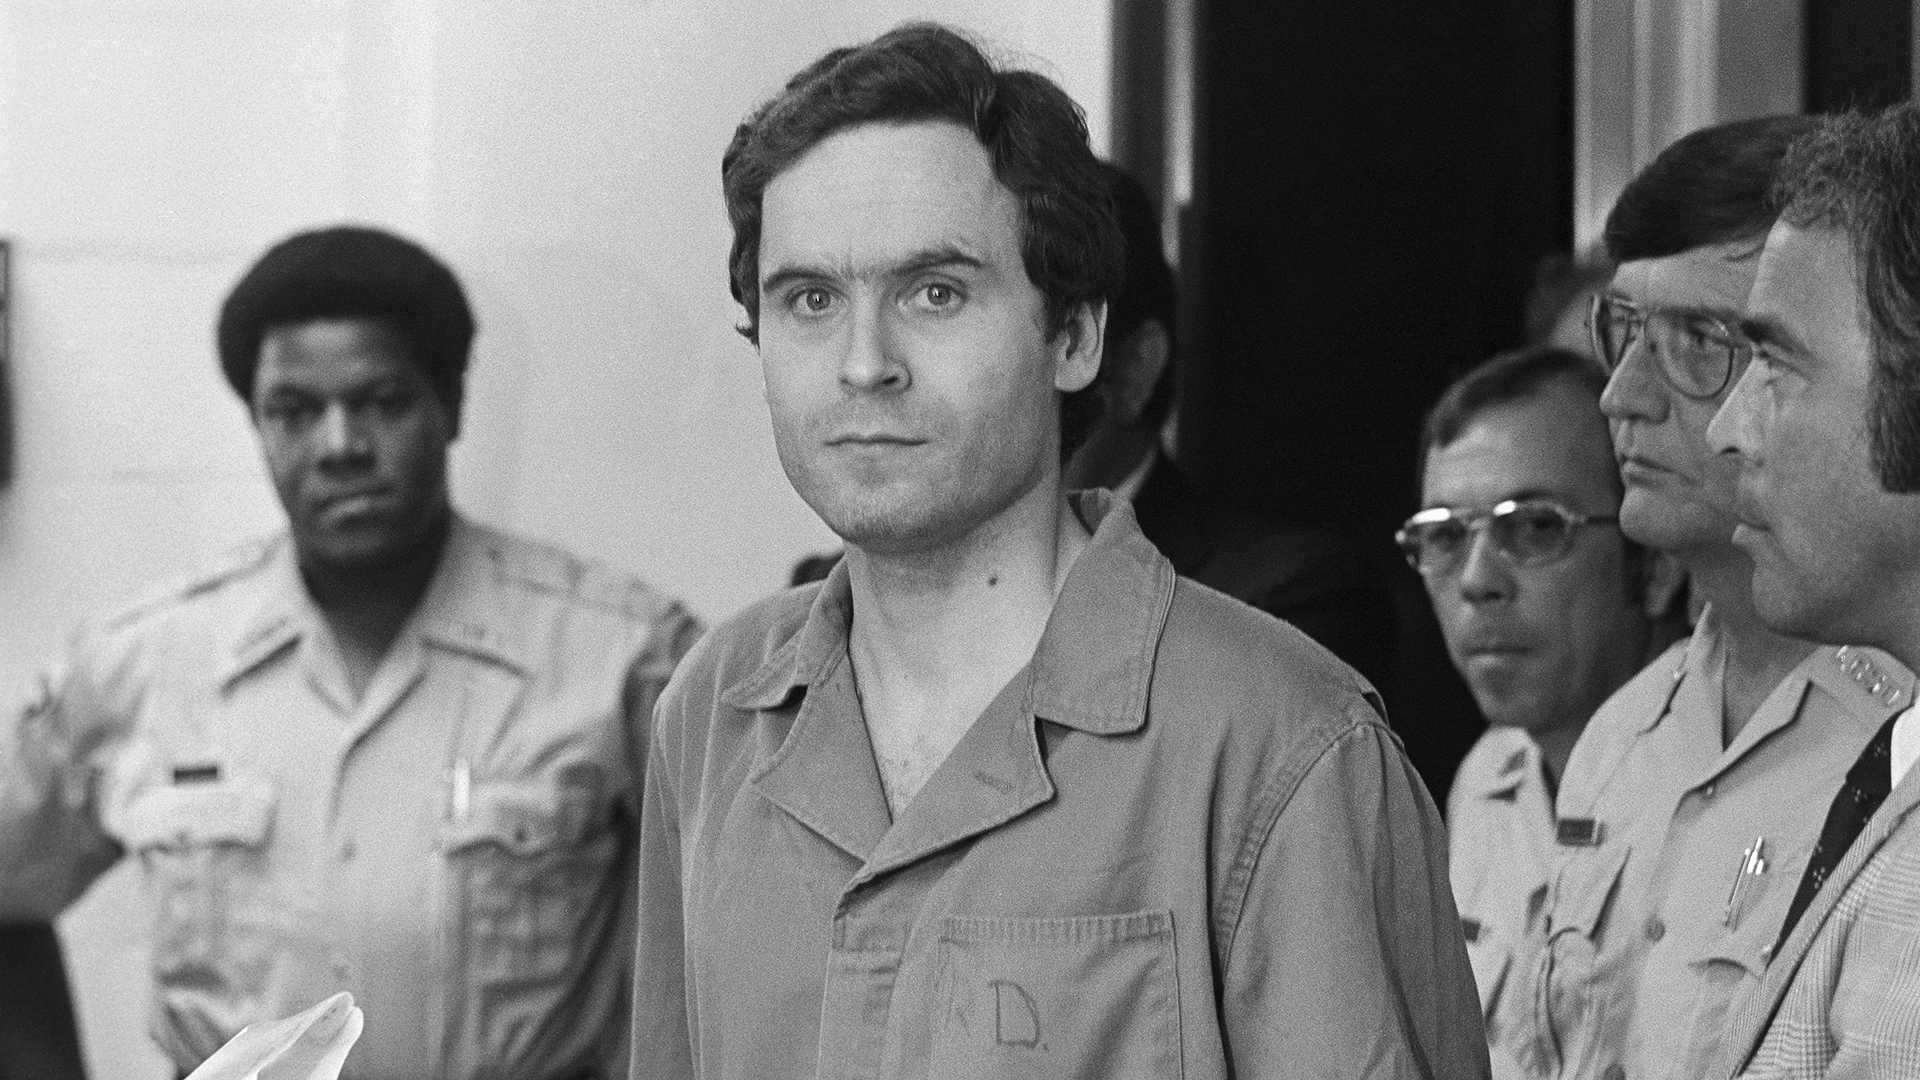 Ægte økse Bug Ted Bundy found guilty of killing 2 women: This day in history